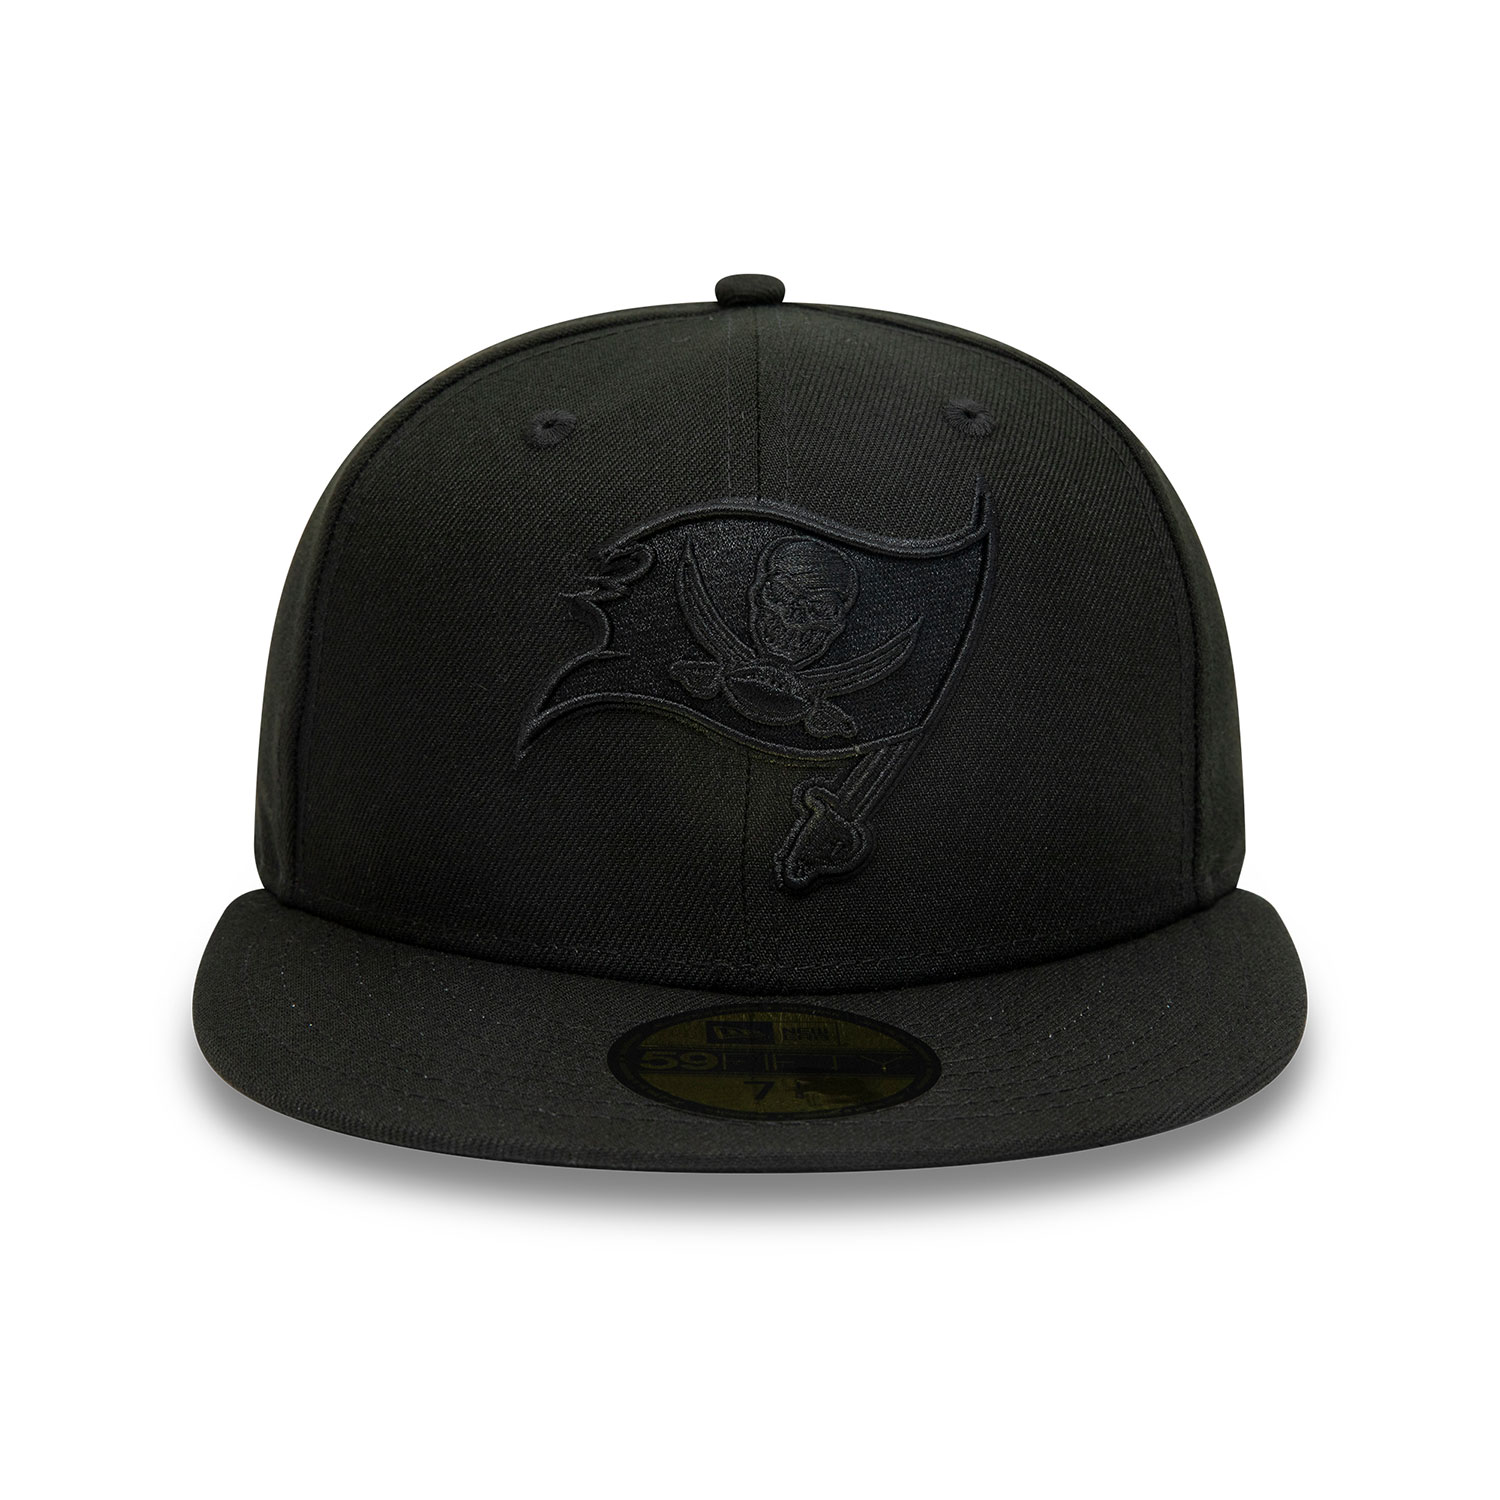 Tampa Bay Buccaneers NFL Blackout 59FIFTY Fitted Cap